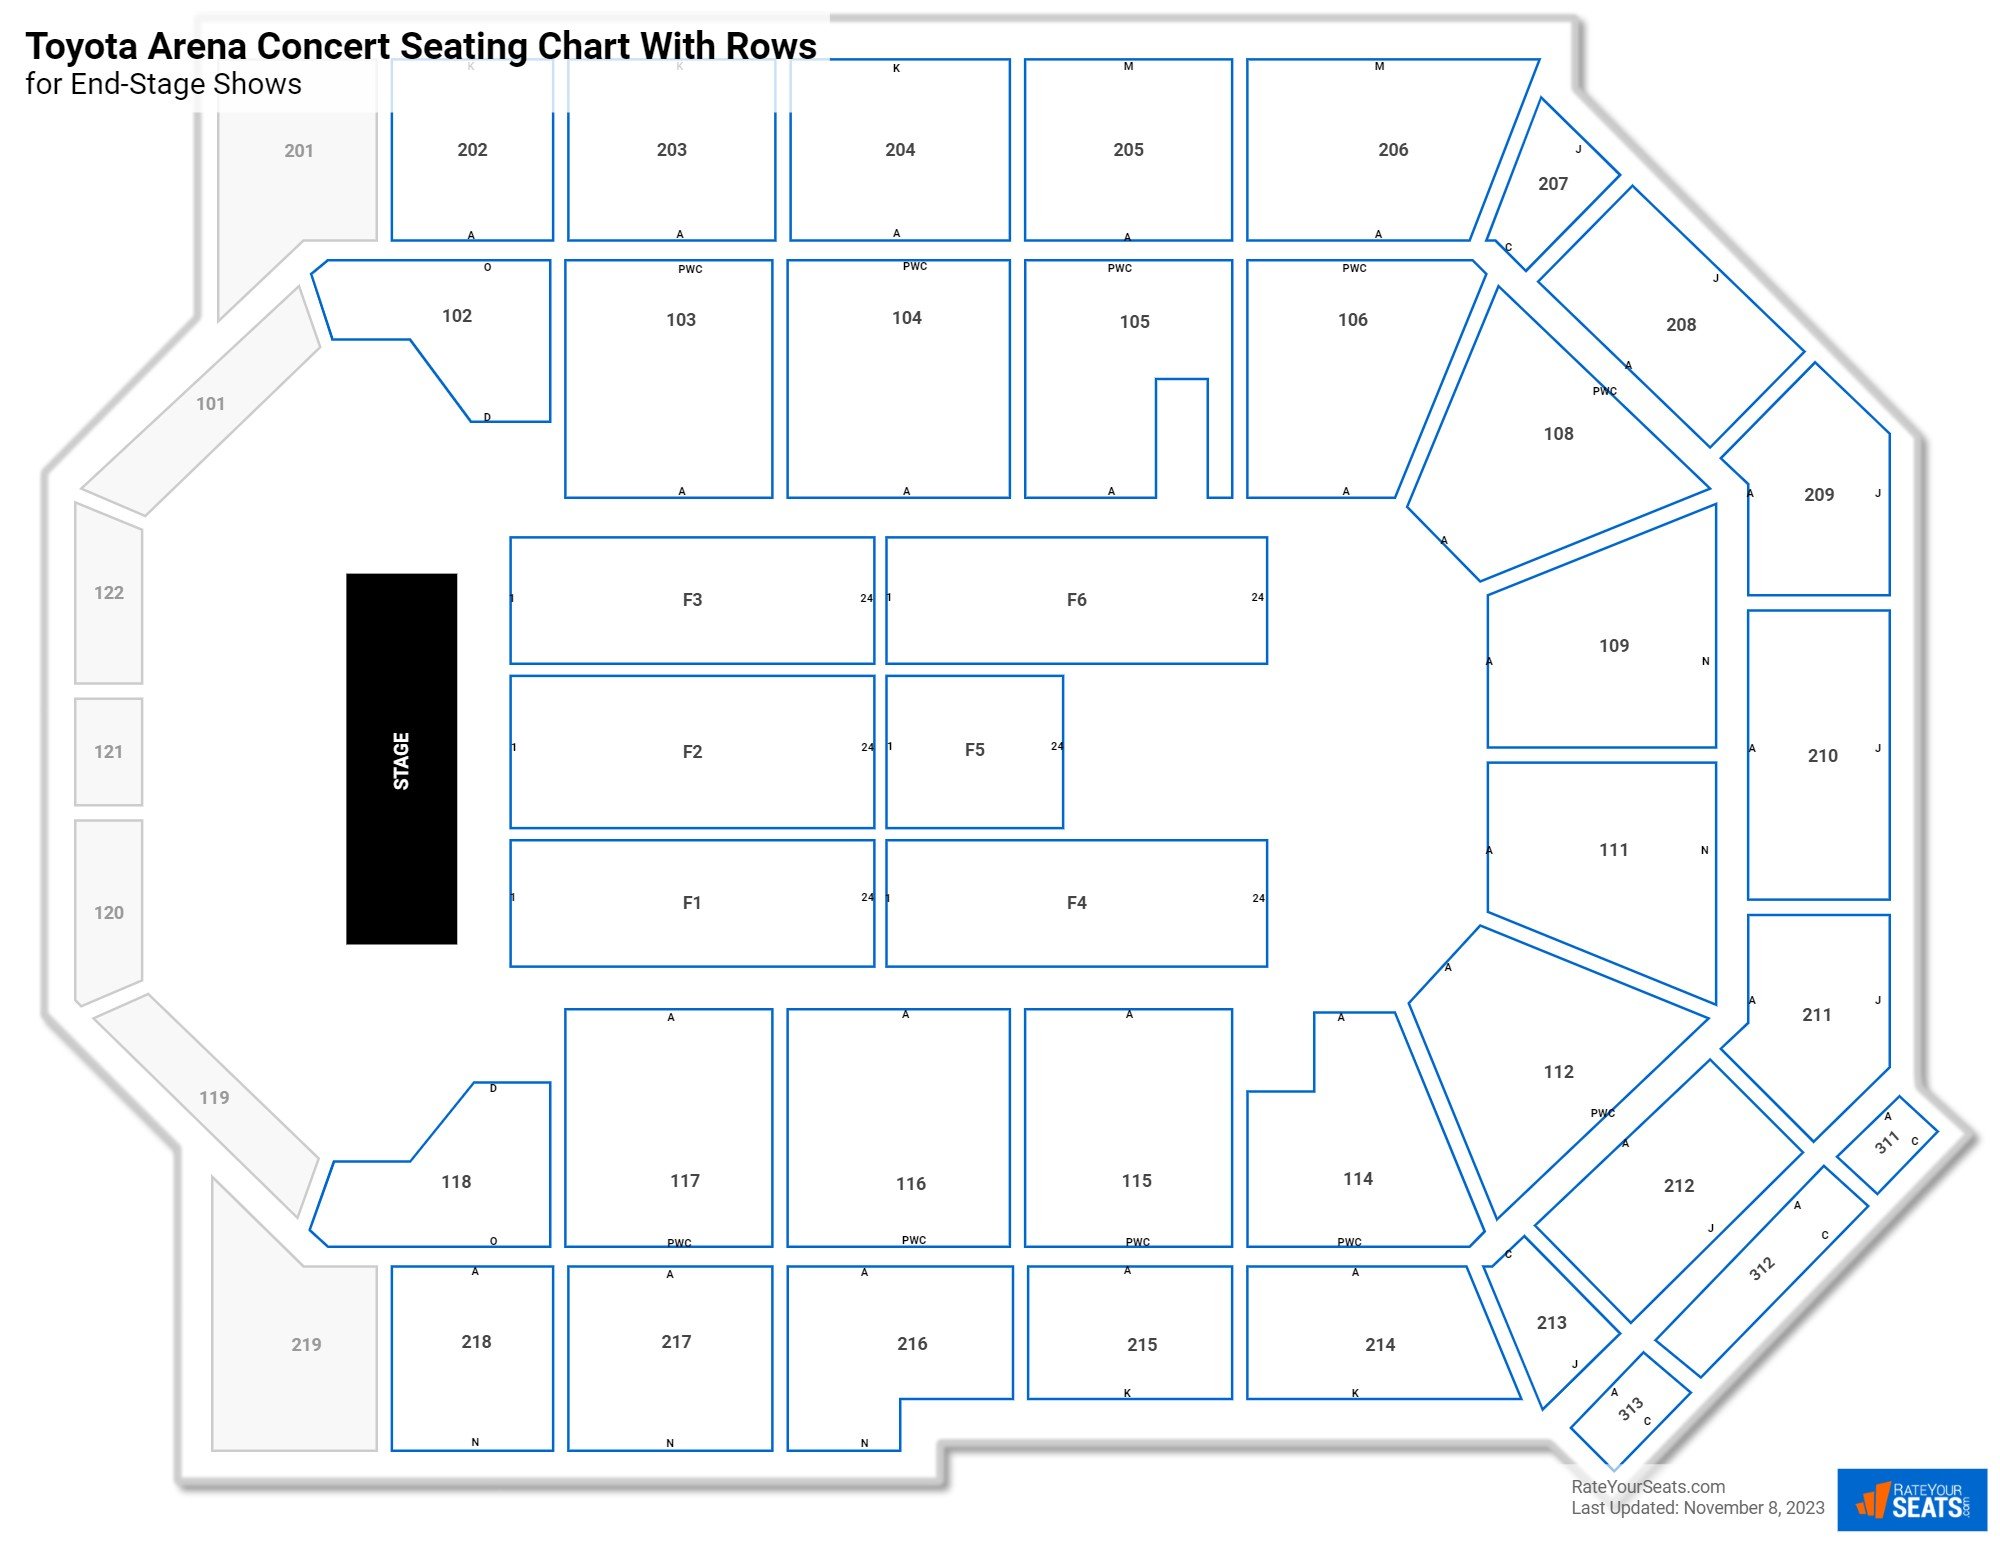 Toyota Arena seating chart with row numbers